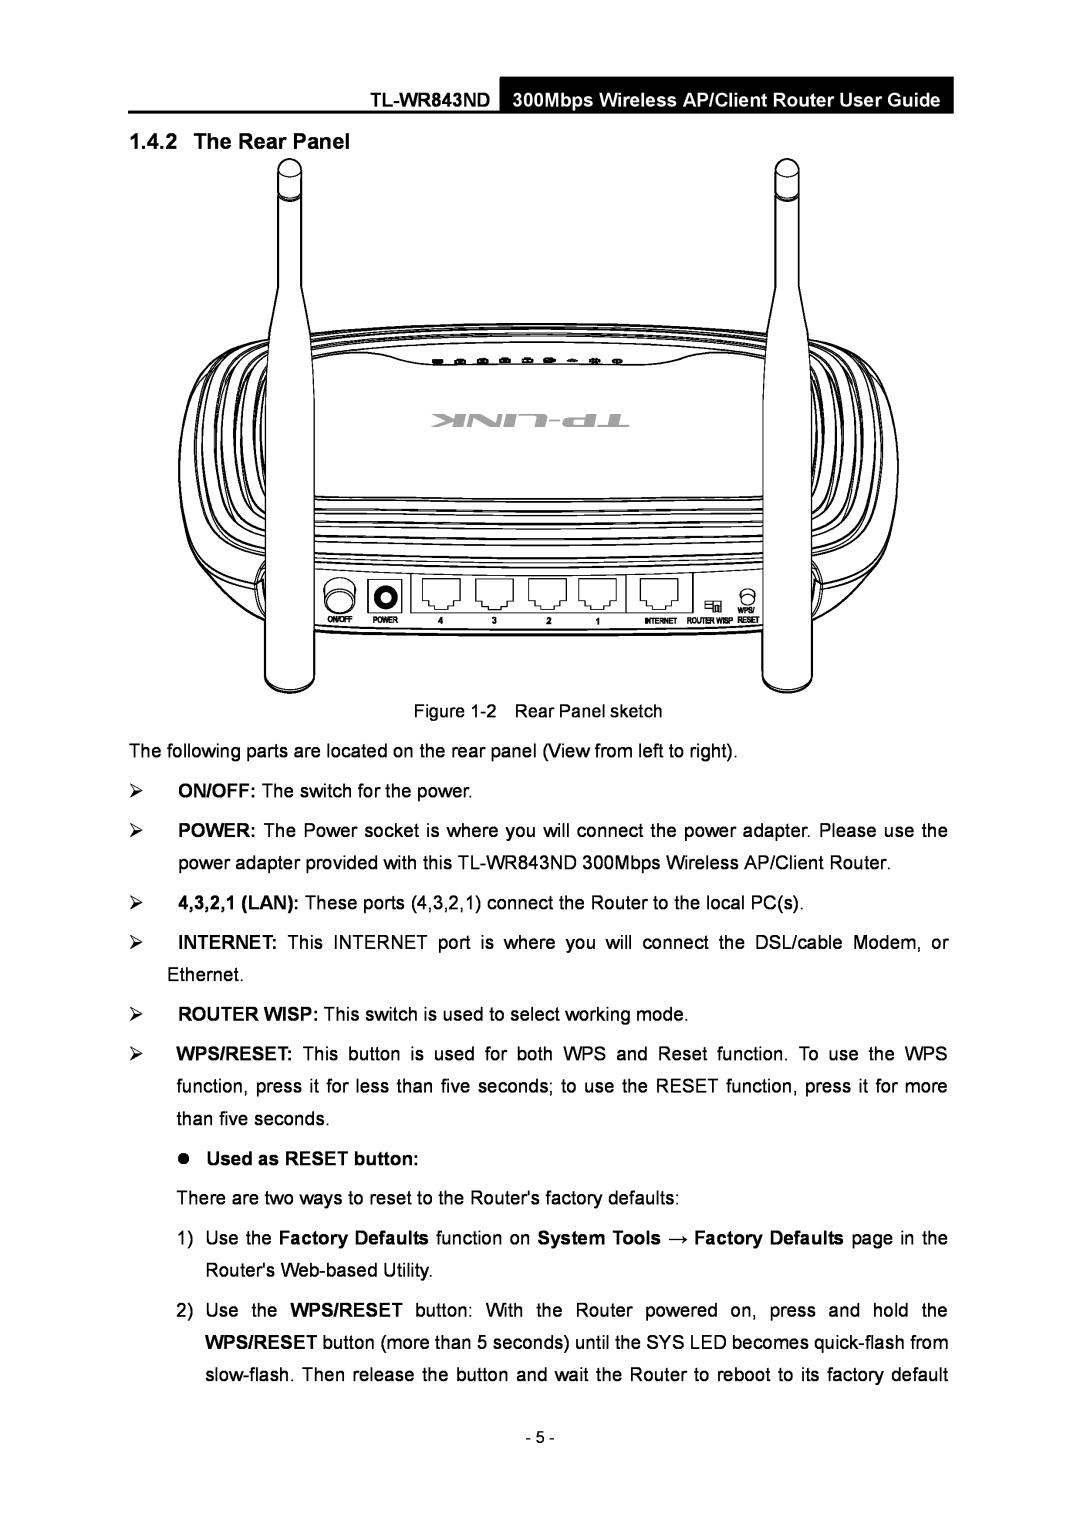 TP-Link manual The Rear Panel,  Used as RESET button, TL-WR843ND 300Mbps Wireless AP/Client Router User Guide 